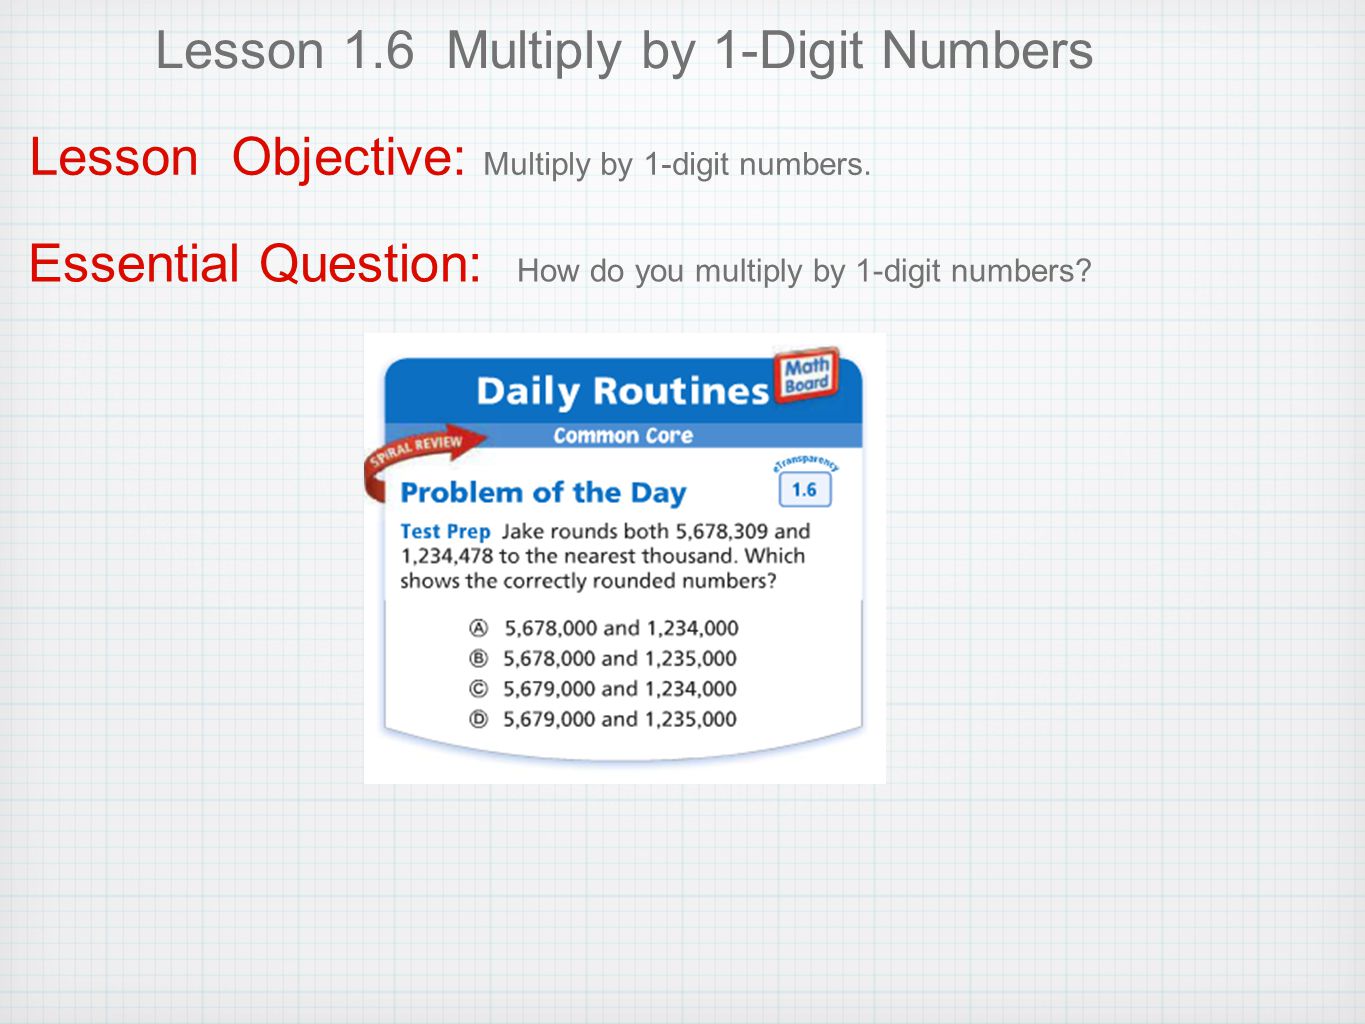 Lesson 1.6 Multiply by 1-Digit Numbers